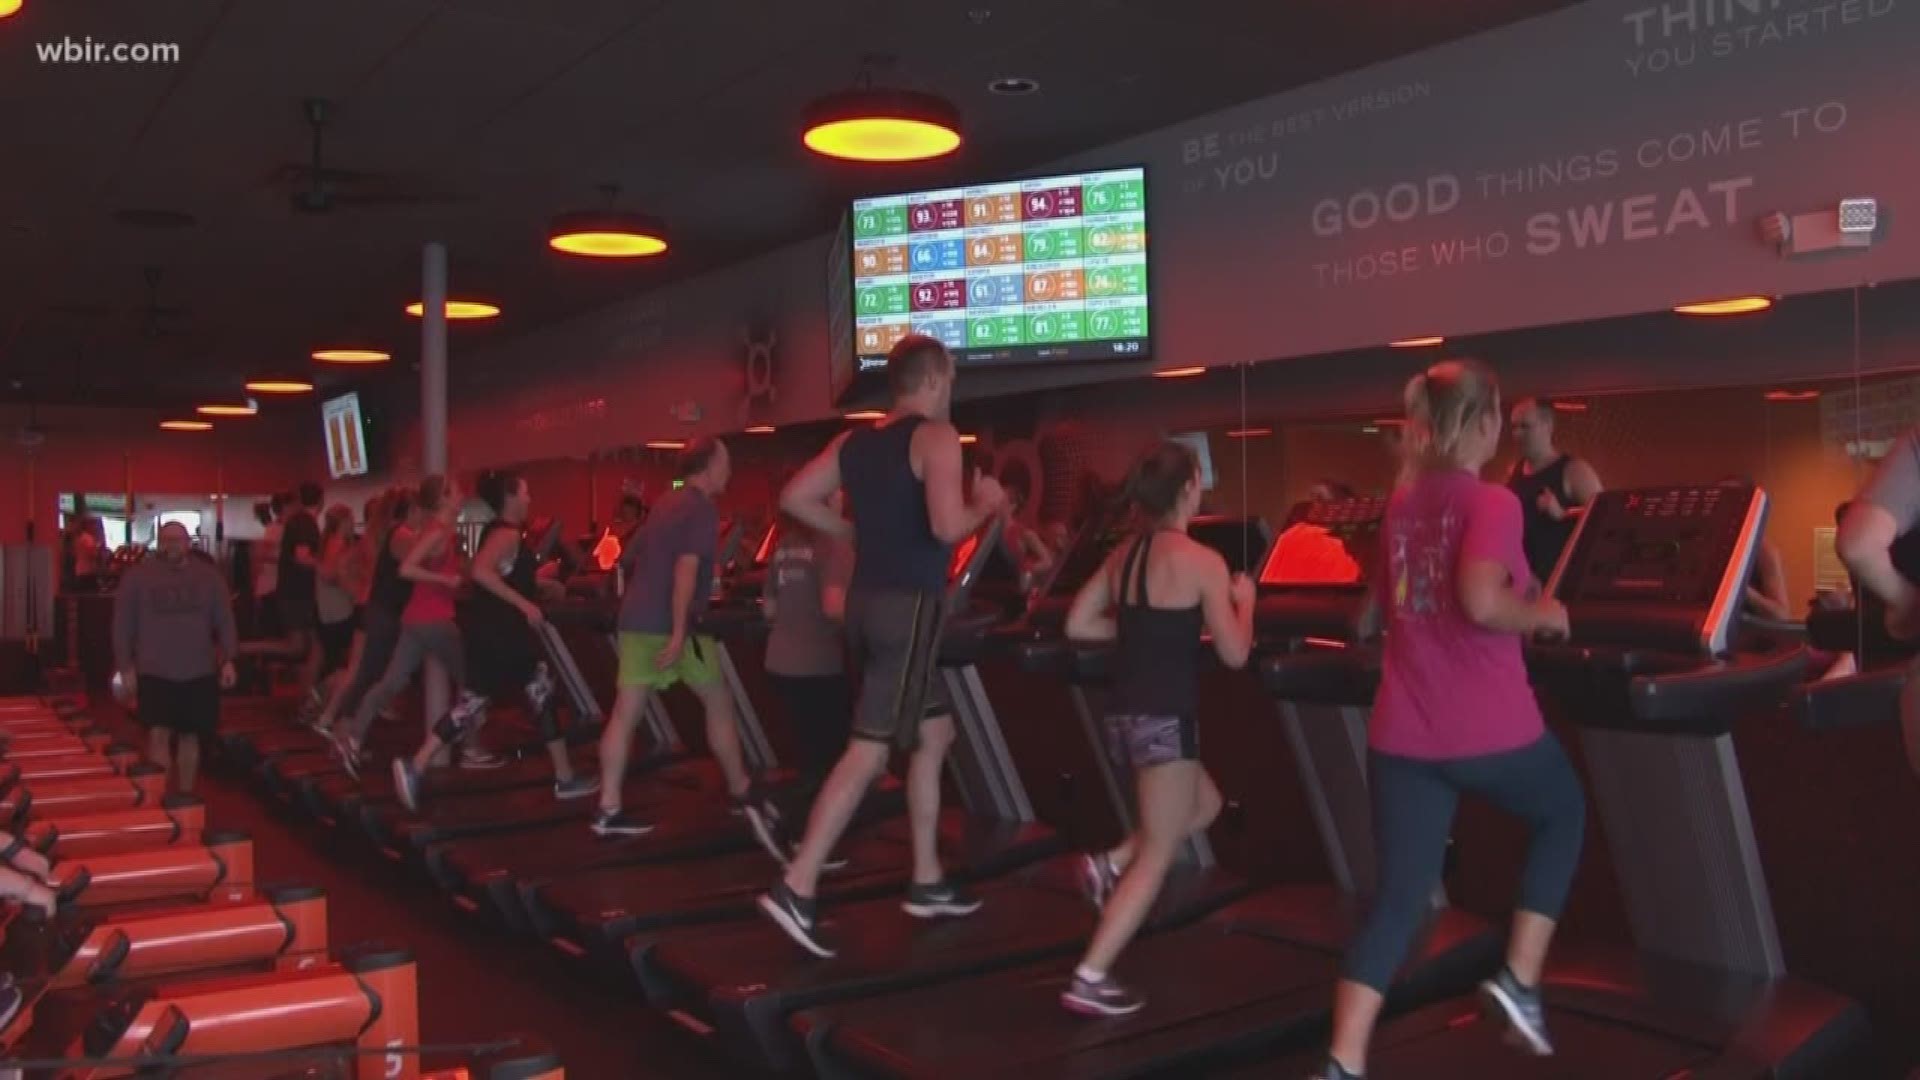 A local lawmaker is trying to get rid of a tax on small gyms.